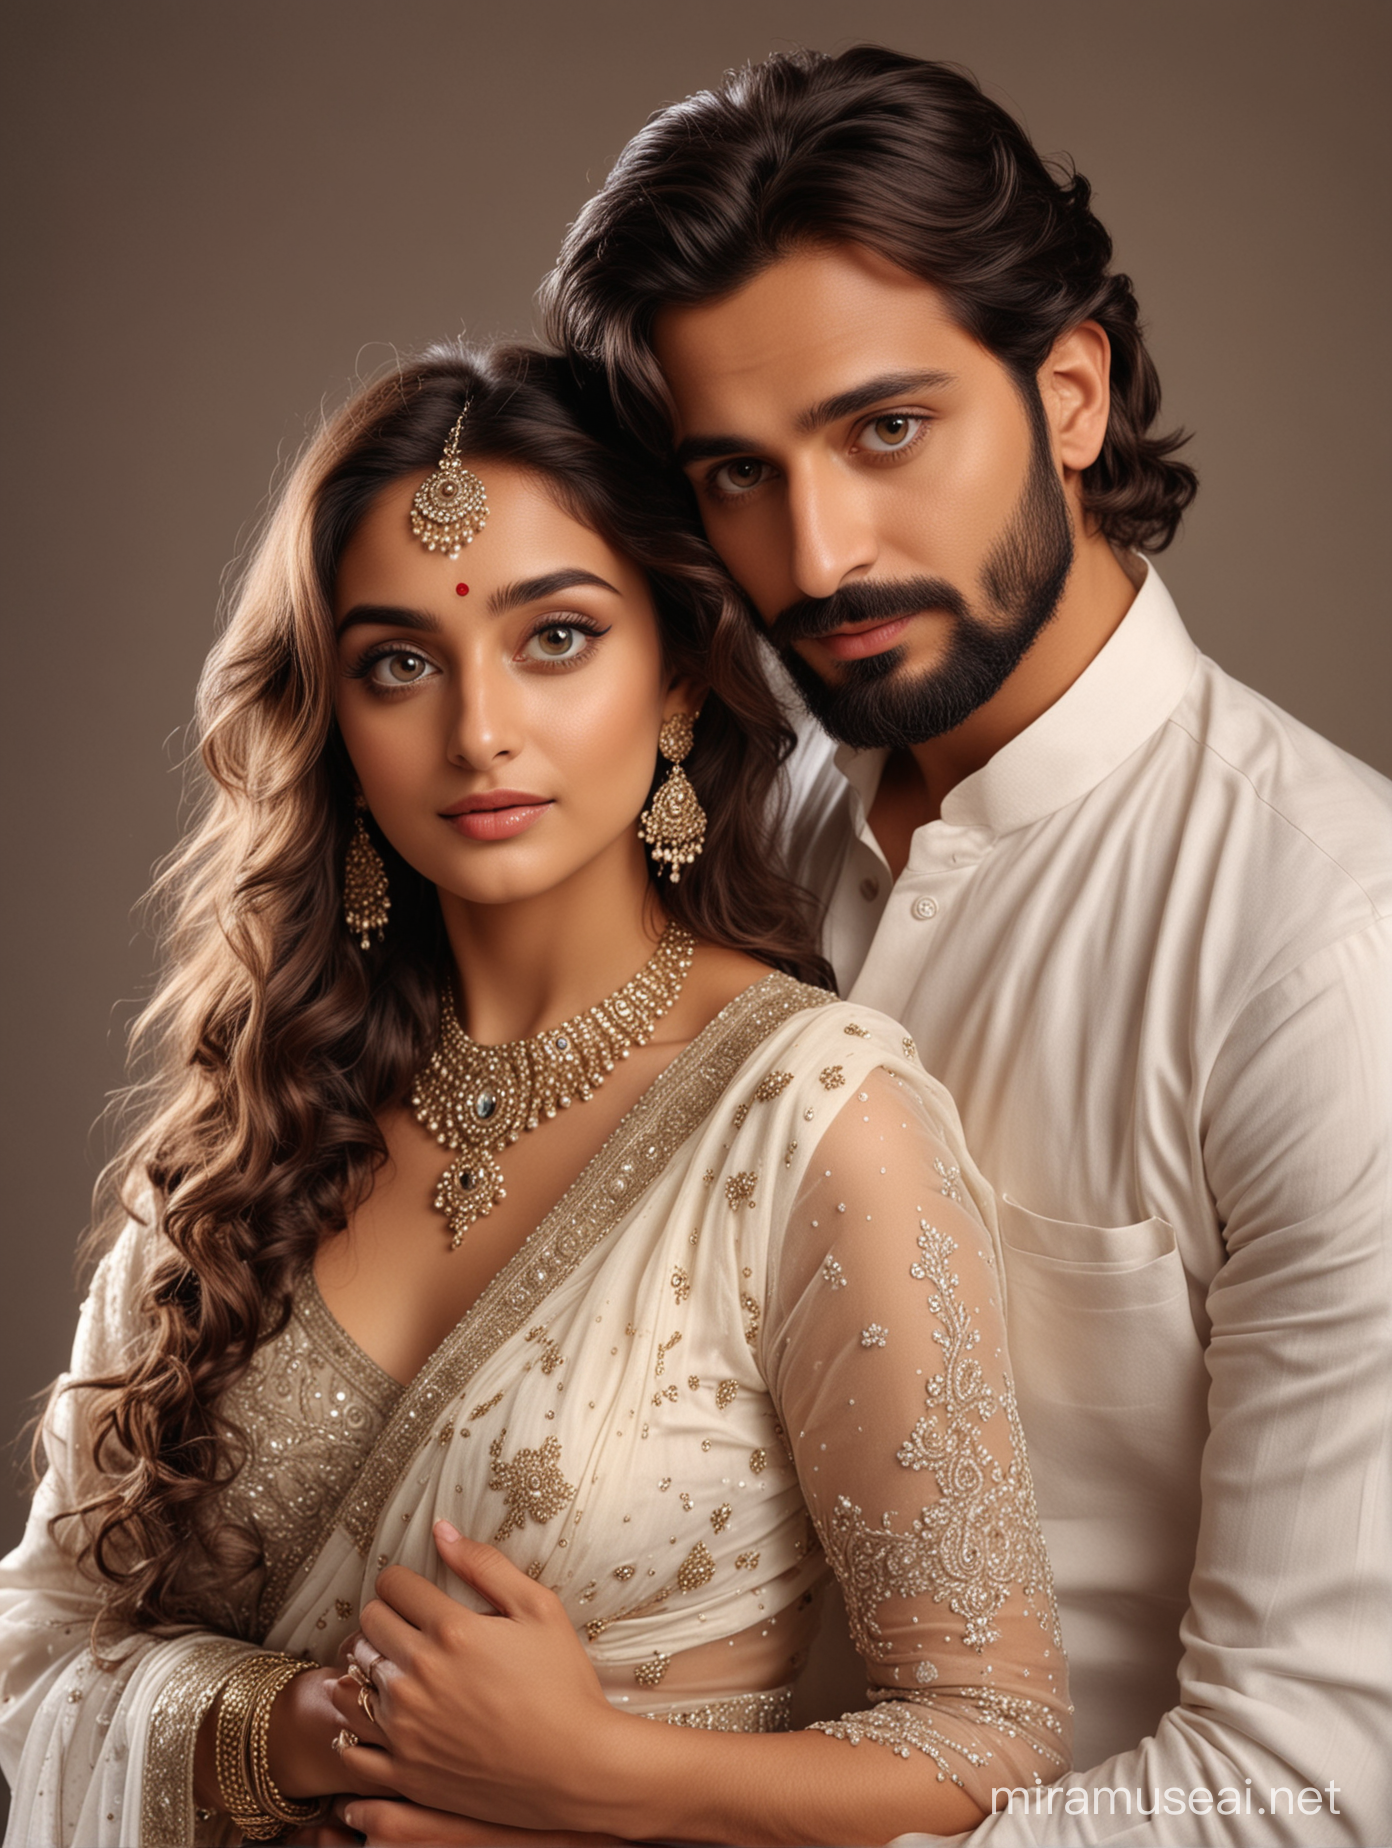 full photo of most beautiful european couple as most beautiful indian couple, most beautiful girl in elegant saree and long curly hairs, big wide eyes, full face, makeup, girl embracing man from back side, . hands around man neck, man with stylish beard, formals, photo realistic, 4k.